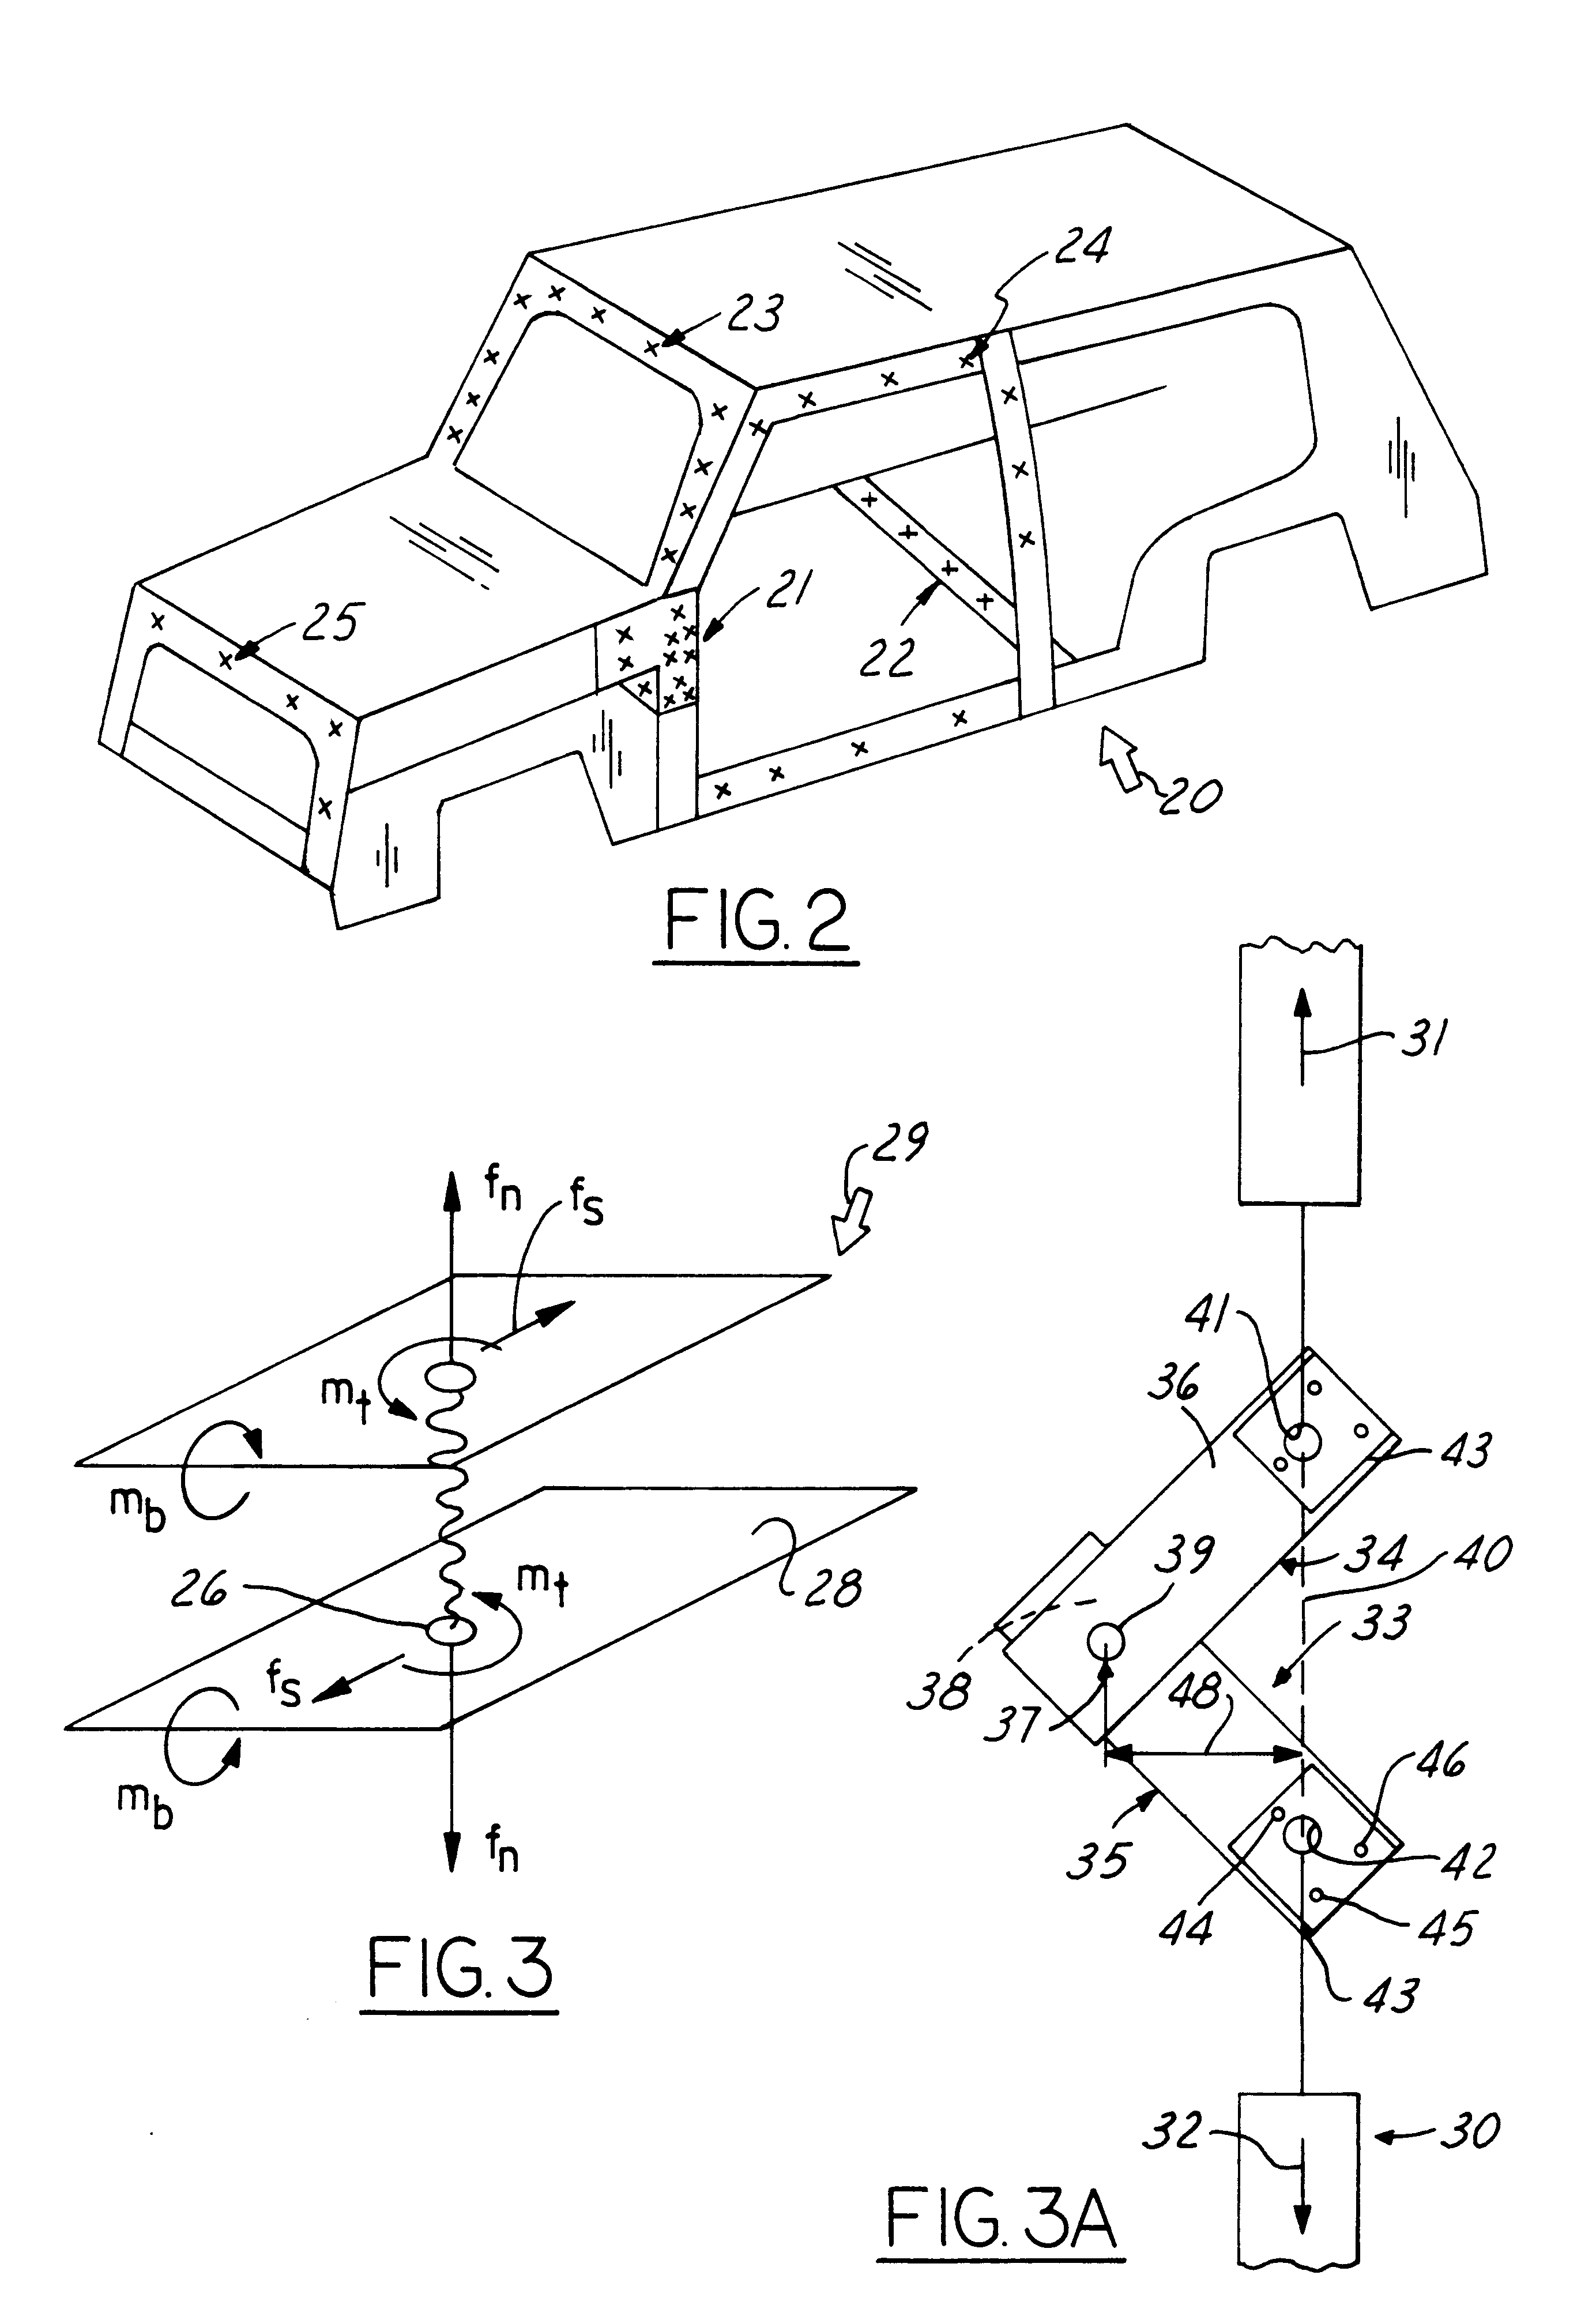 Method of analyzing spot welded structures